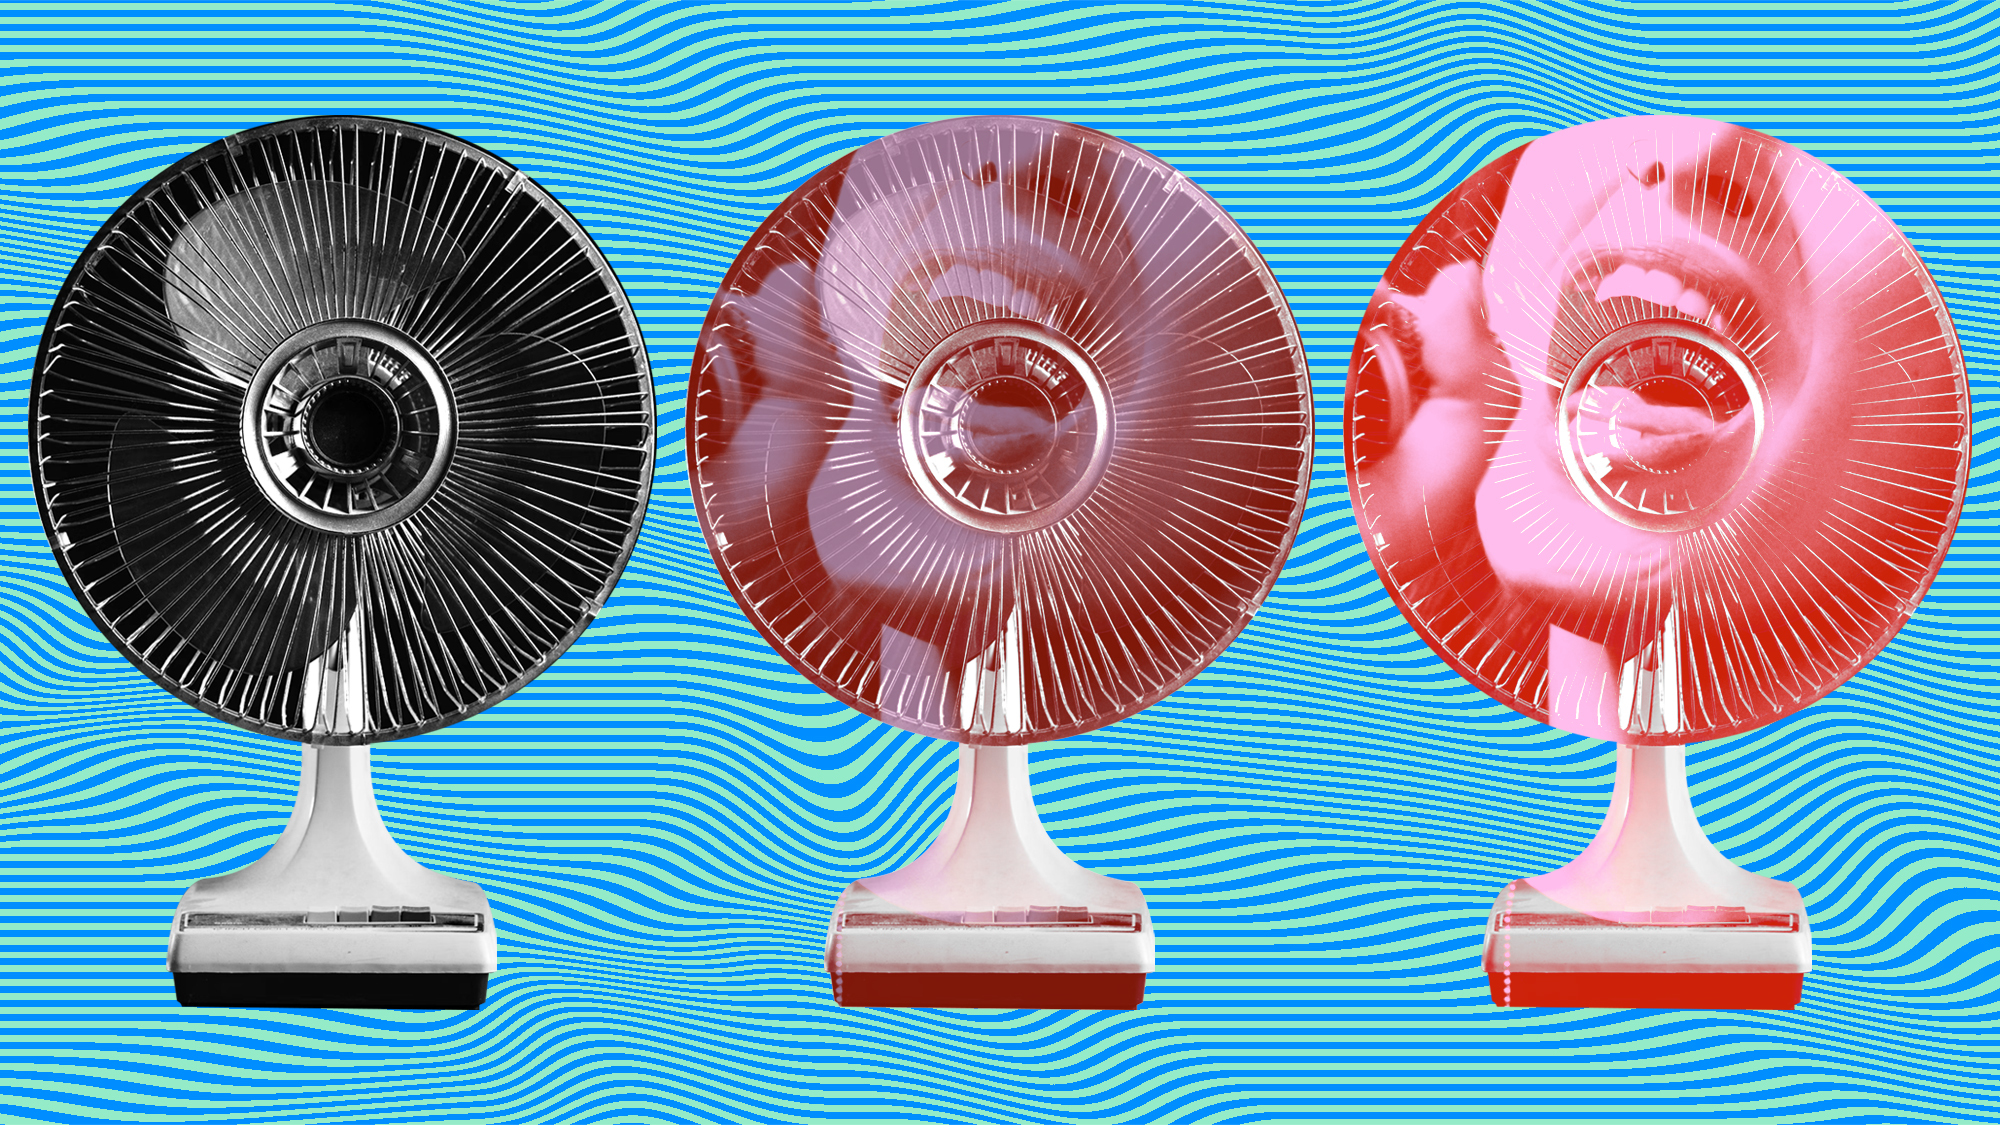 Colorful fans with depictions of various sounds within them